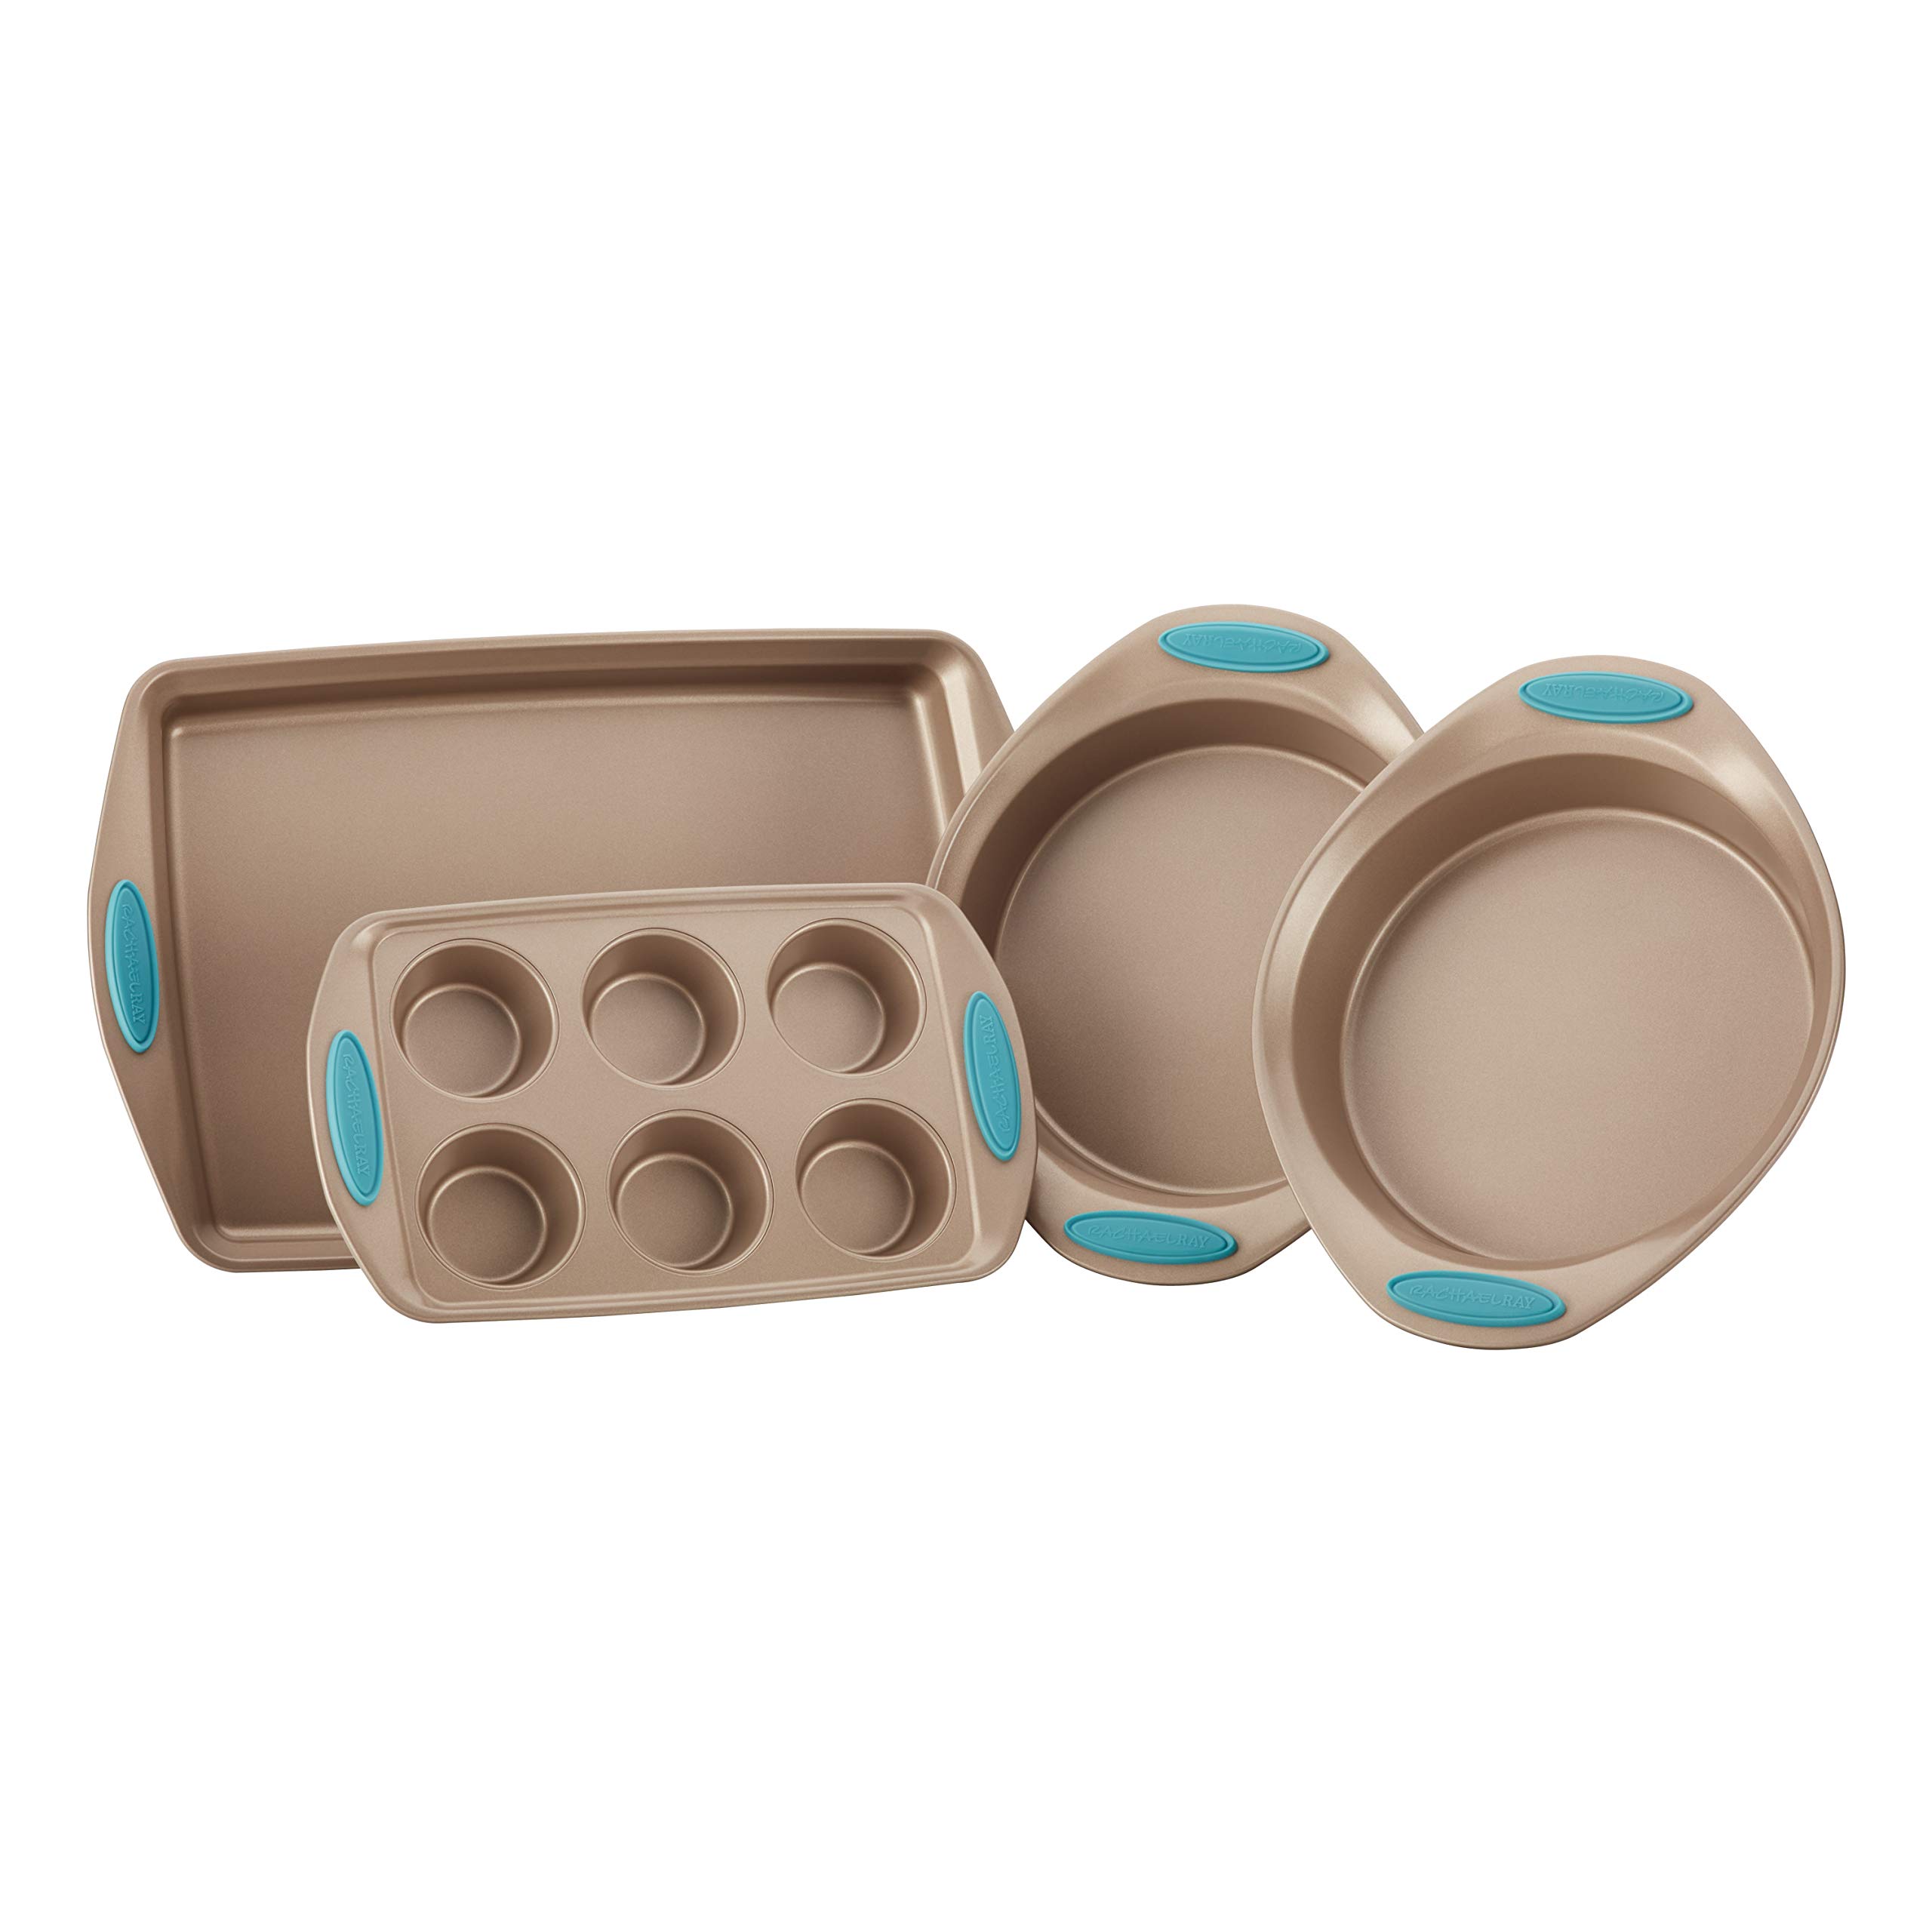 Rachael Ray Cucina Bakeware Set Includes Nonstick Cake Cookie Baking Sheet and Muffin Cupcake Pan, 4 Piece, Latte Brown with Agave Blue Grips